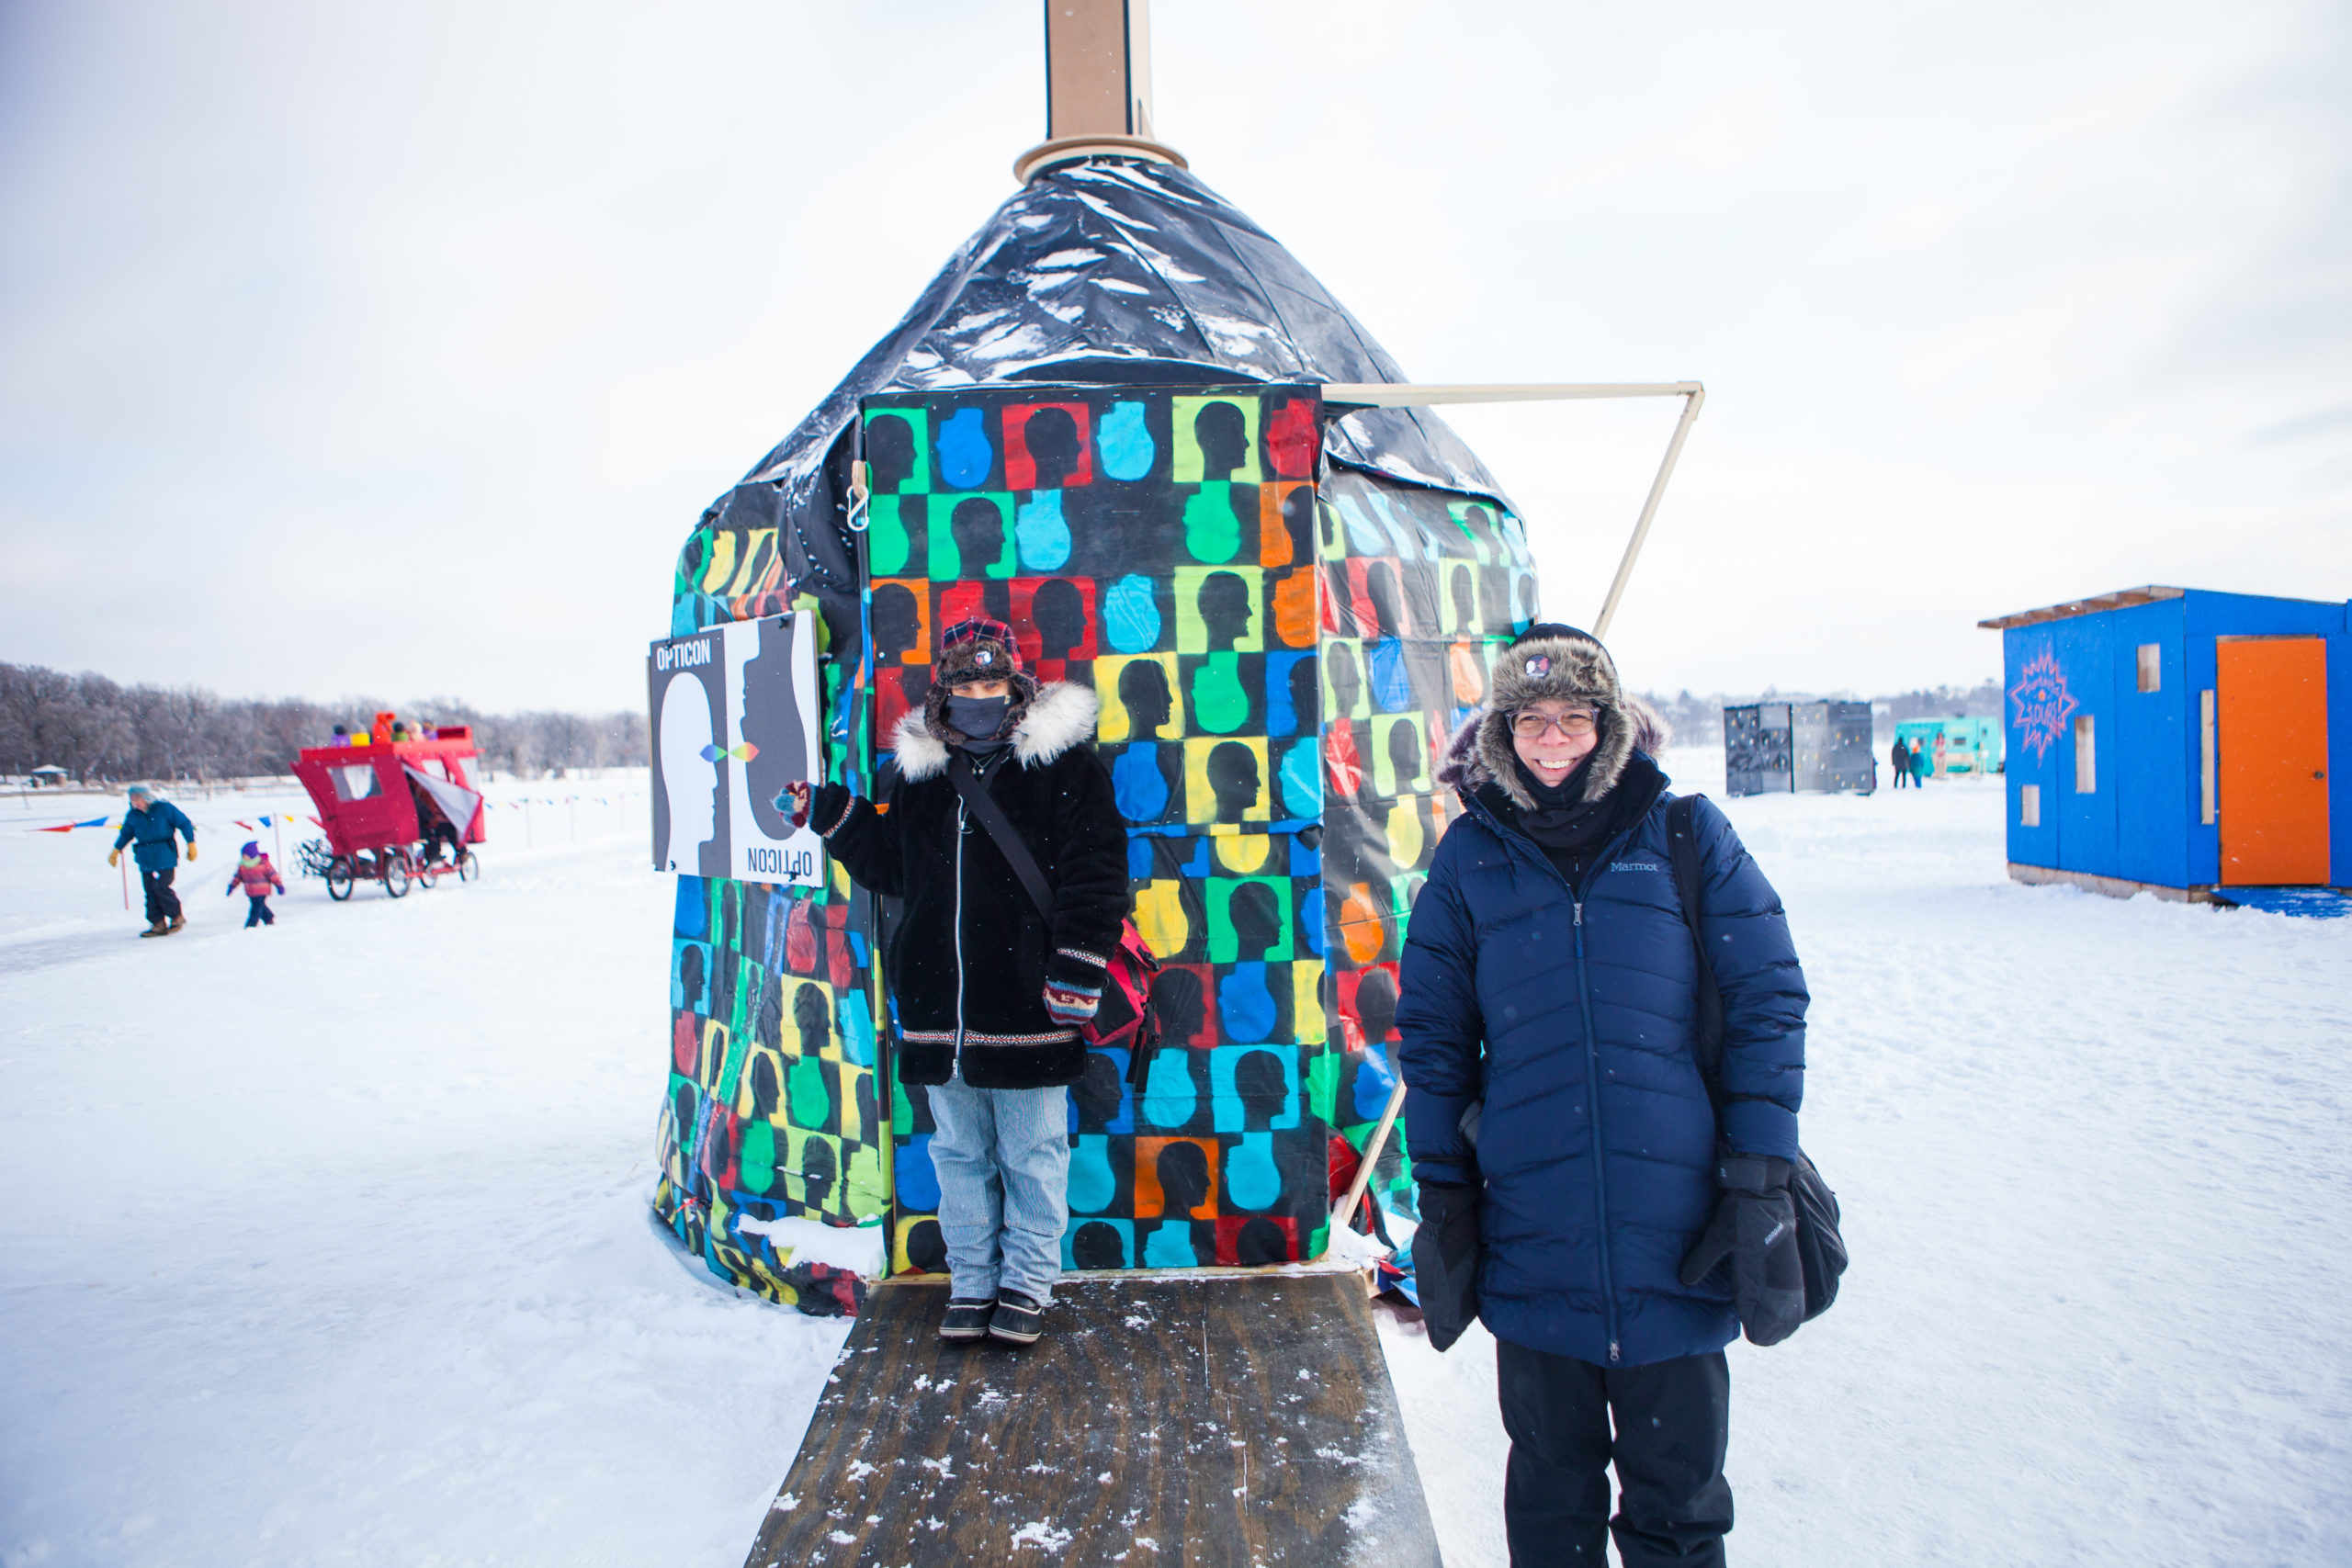 An bunded up artist stands in front of a colorful yurt on a frozen lake. Other shanties and people are seen in the distance, across the ice.